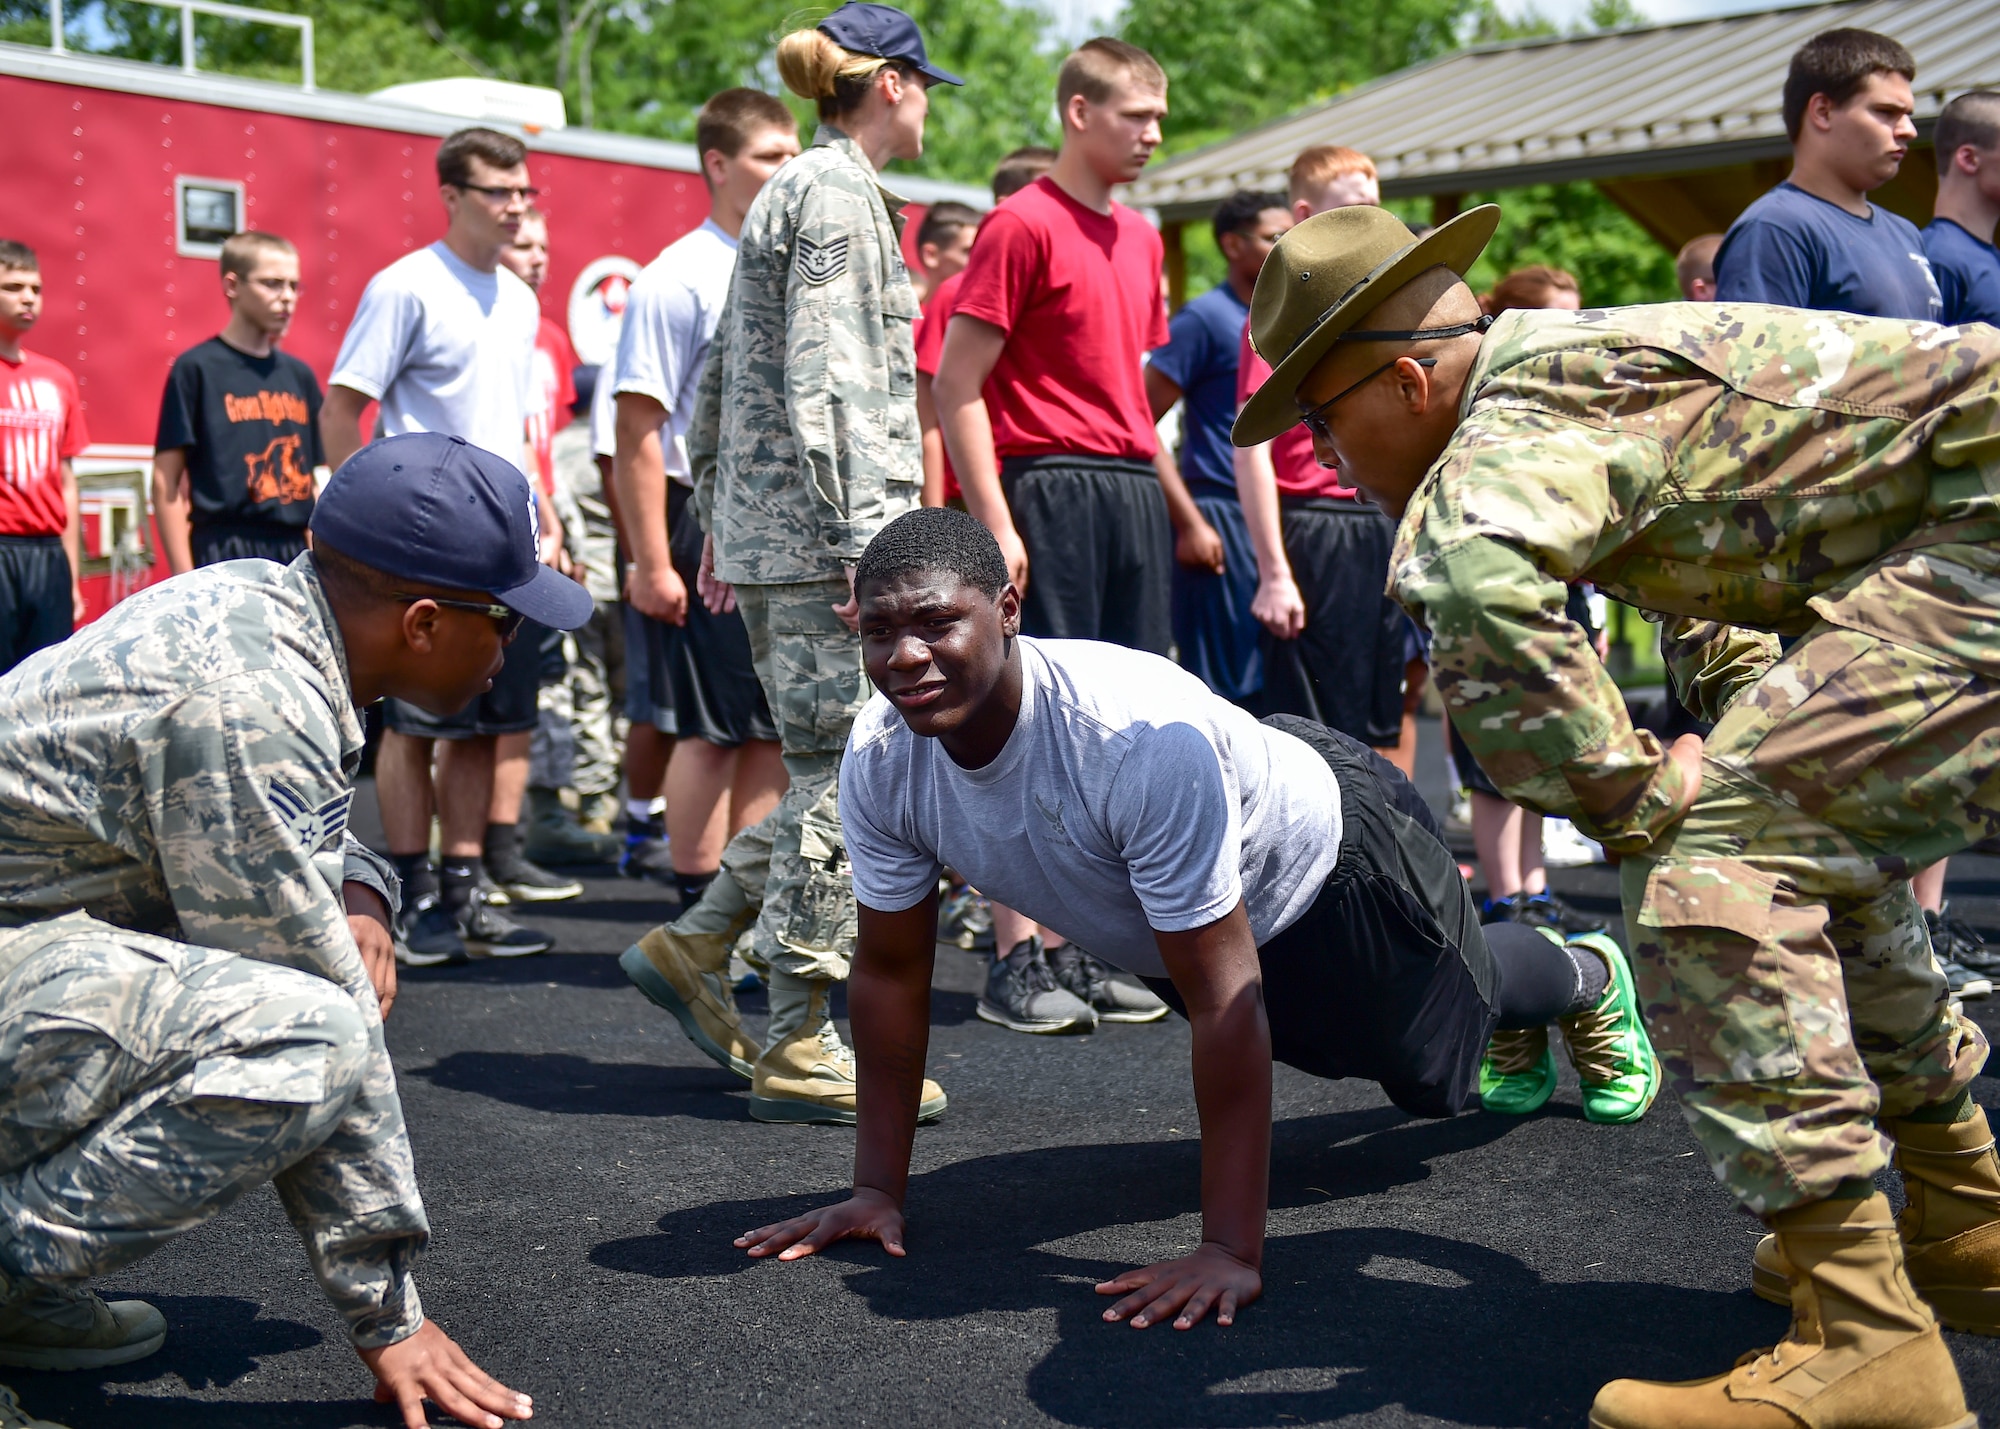 U.S. Air Force Reserve Senior Airman James Smith III, a member of the 910th Force Support Squadron, and U.S. Army Staff Sgt. Brandon Curry, a drill sergeant with the 1st Bn., 390th Inf. Reg., motivate a Reserve Officer Training Corps (JROTC) cadet doing pushups during an encampment here, June 21, 2017. The encampment, facilitated by 910th Airlift Wing Airmen, provided a five-day experience teaching military skills and replicating aspects of Basic Military Training. JROTC is a program sponsored by the Armed Forces for high school students across the country. (U.S. Air Force photo/Eric White)